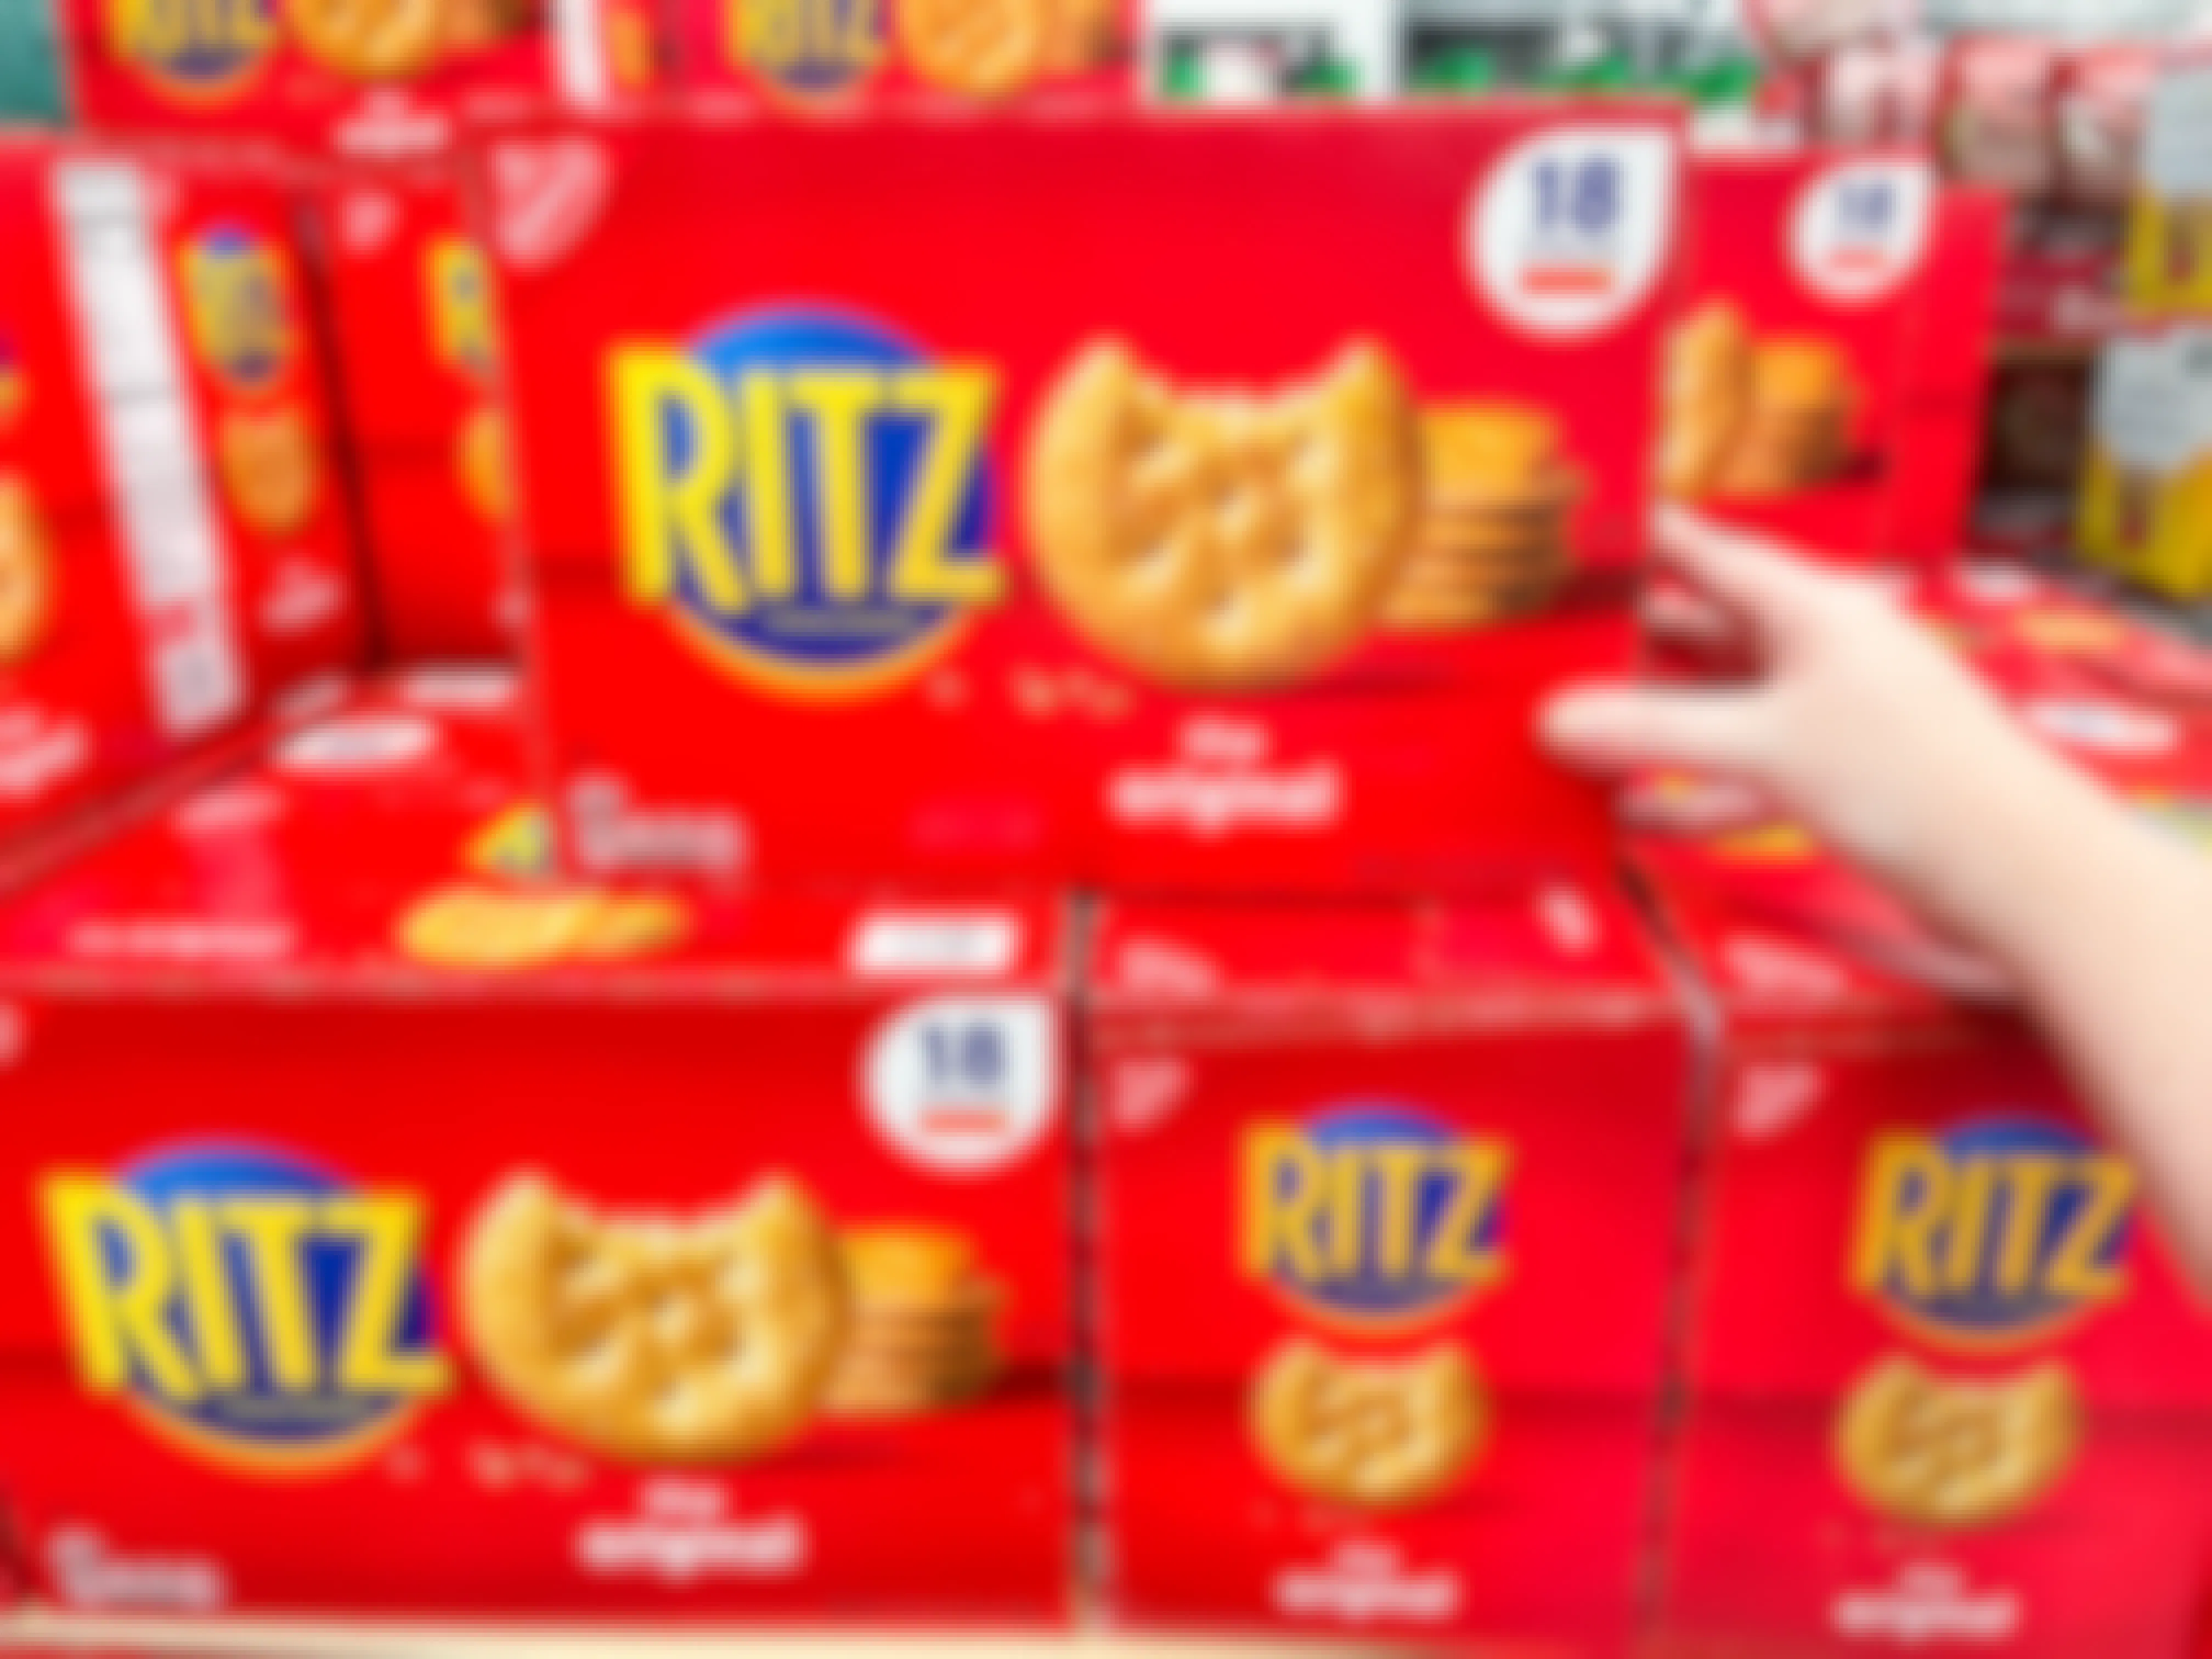 a bo of ritz crackers in store